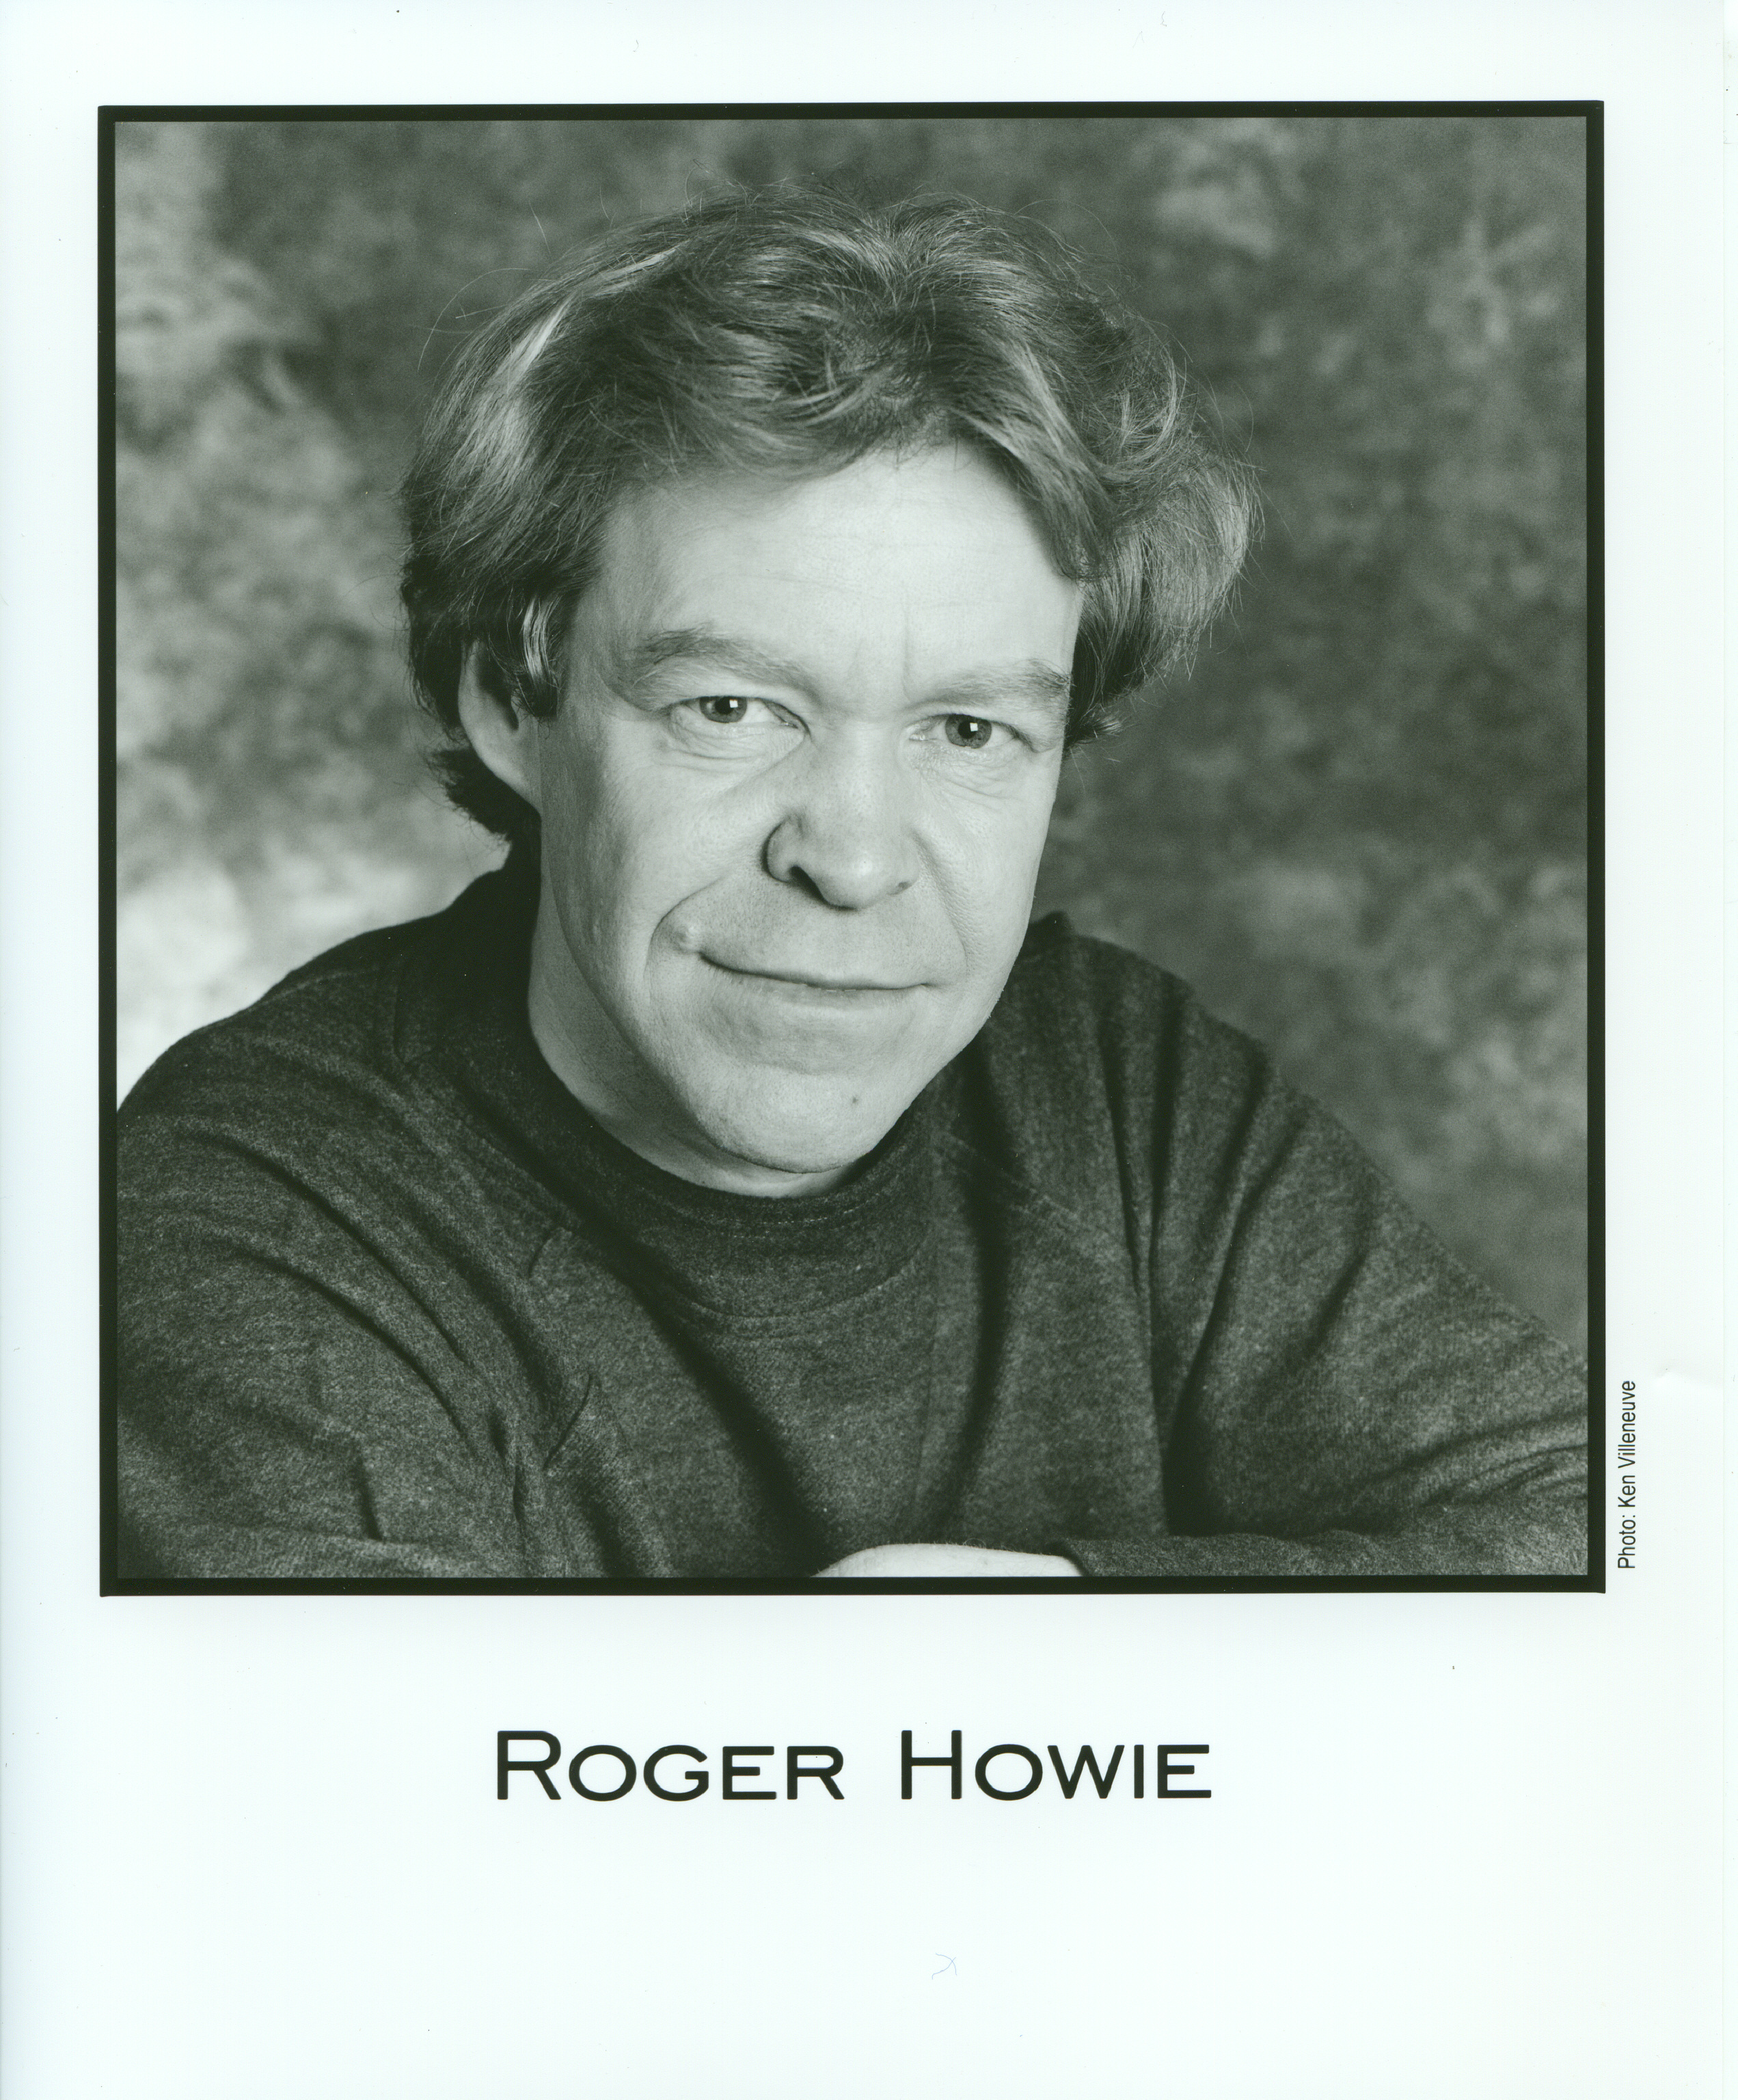 roger Howie